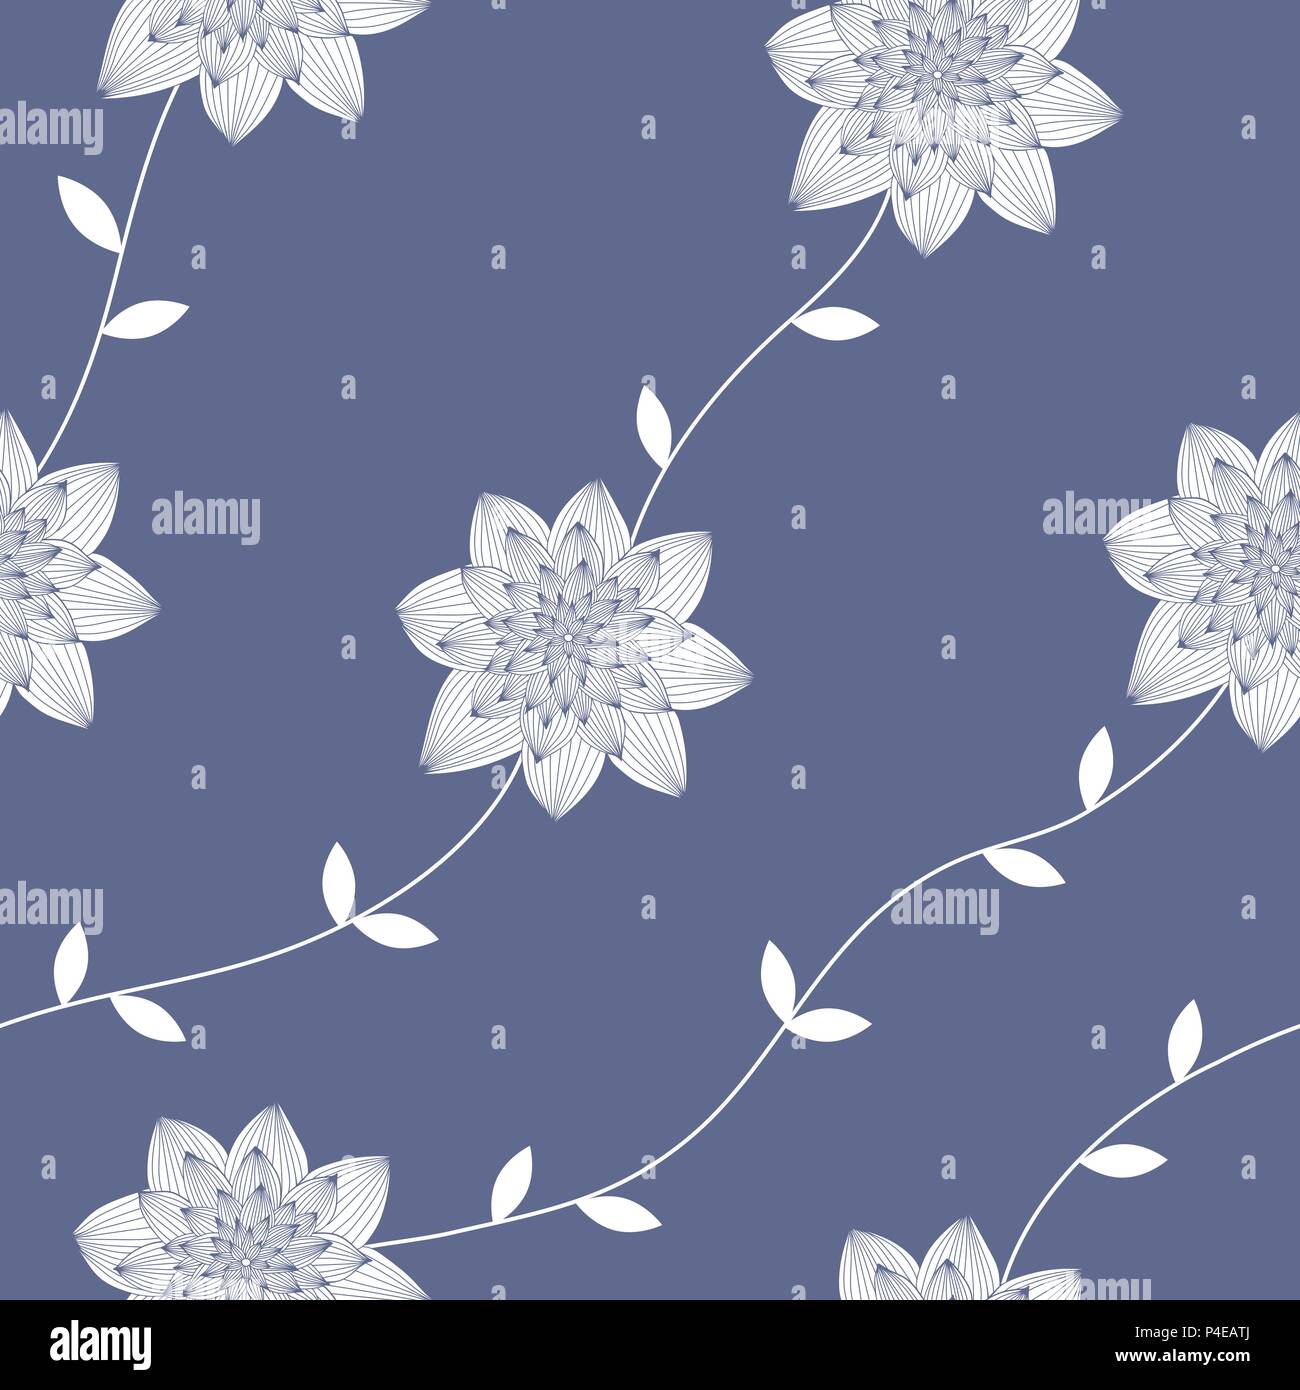 Vector seamless, repeating texture patterns with flowers and leaves. Monochromatic jeans blue. Stock Vector